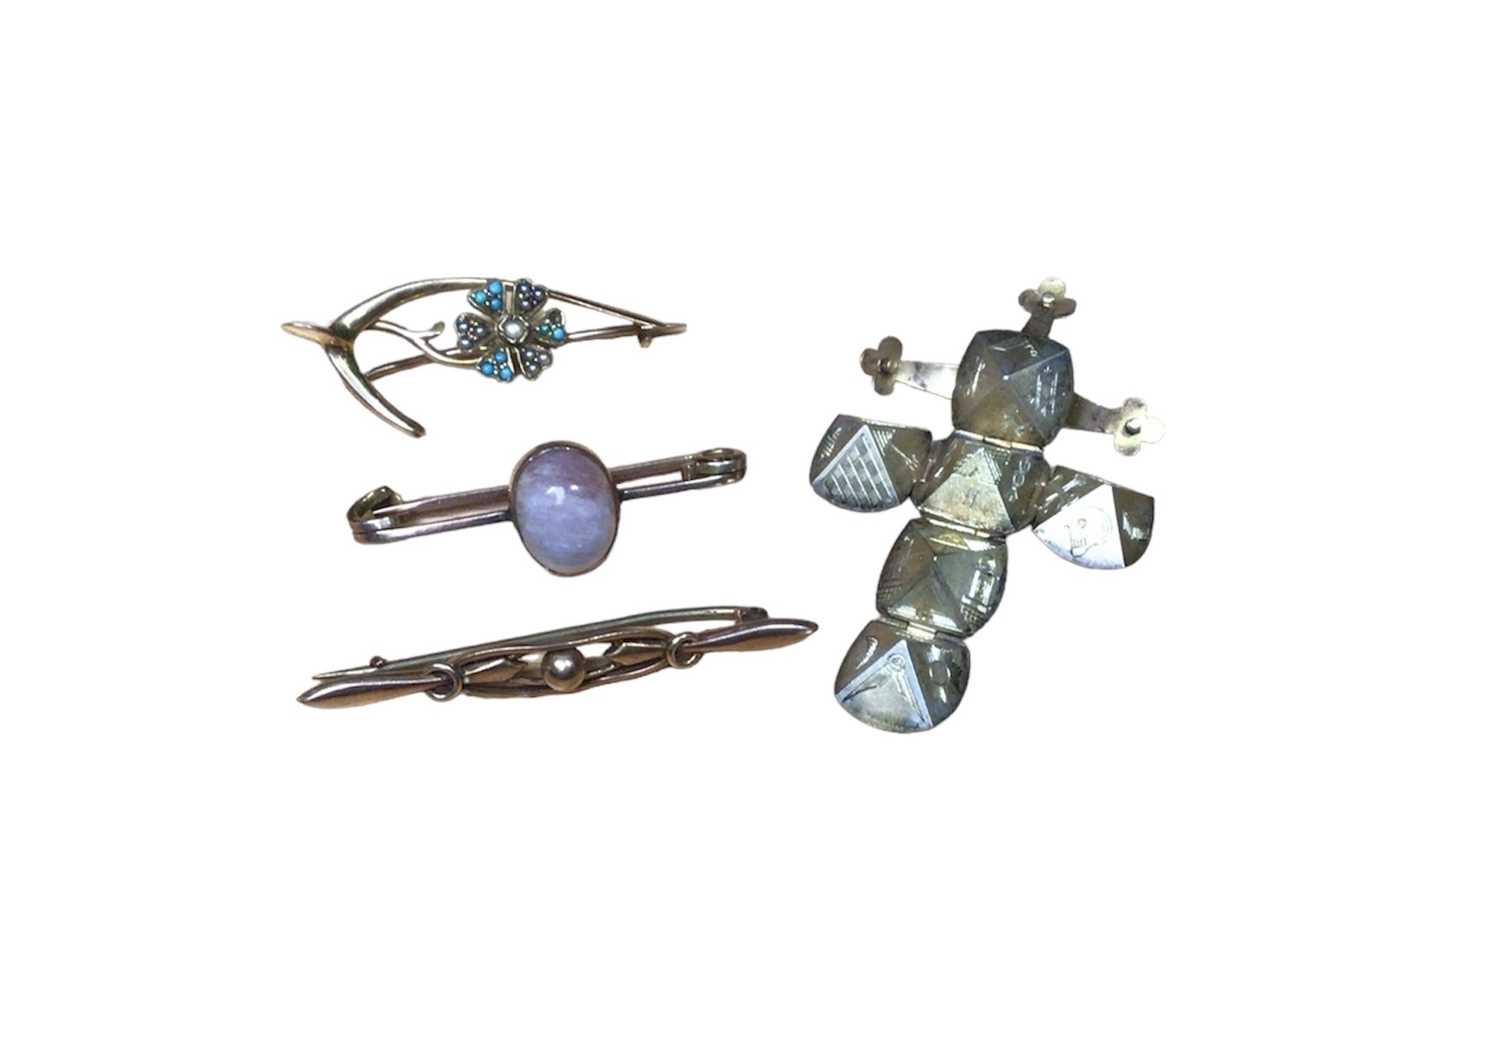 Lot 34 - Edwardian 15ct gold seed pearl and turquoise floral brooch, two 9ct gold bar brooches and 9ct gold spherical charm which unfurls to reveal a cross engraved with Masonic and other symbols